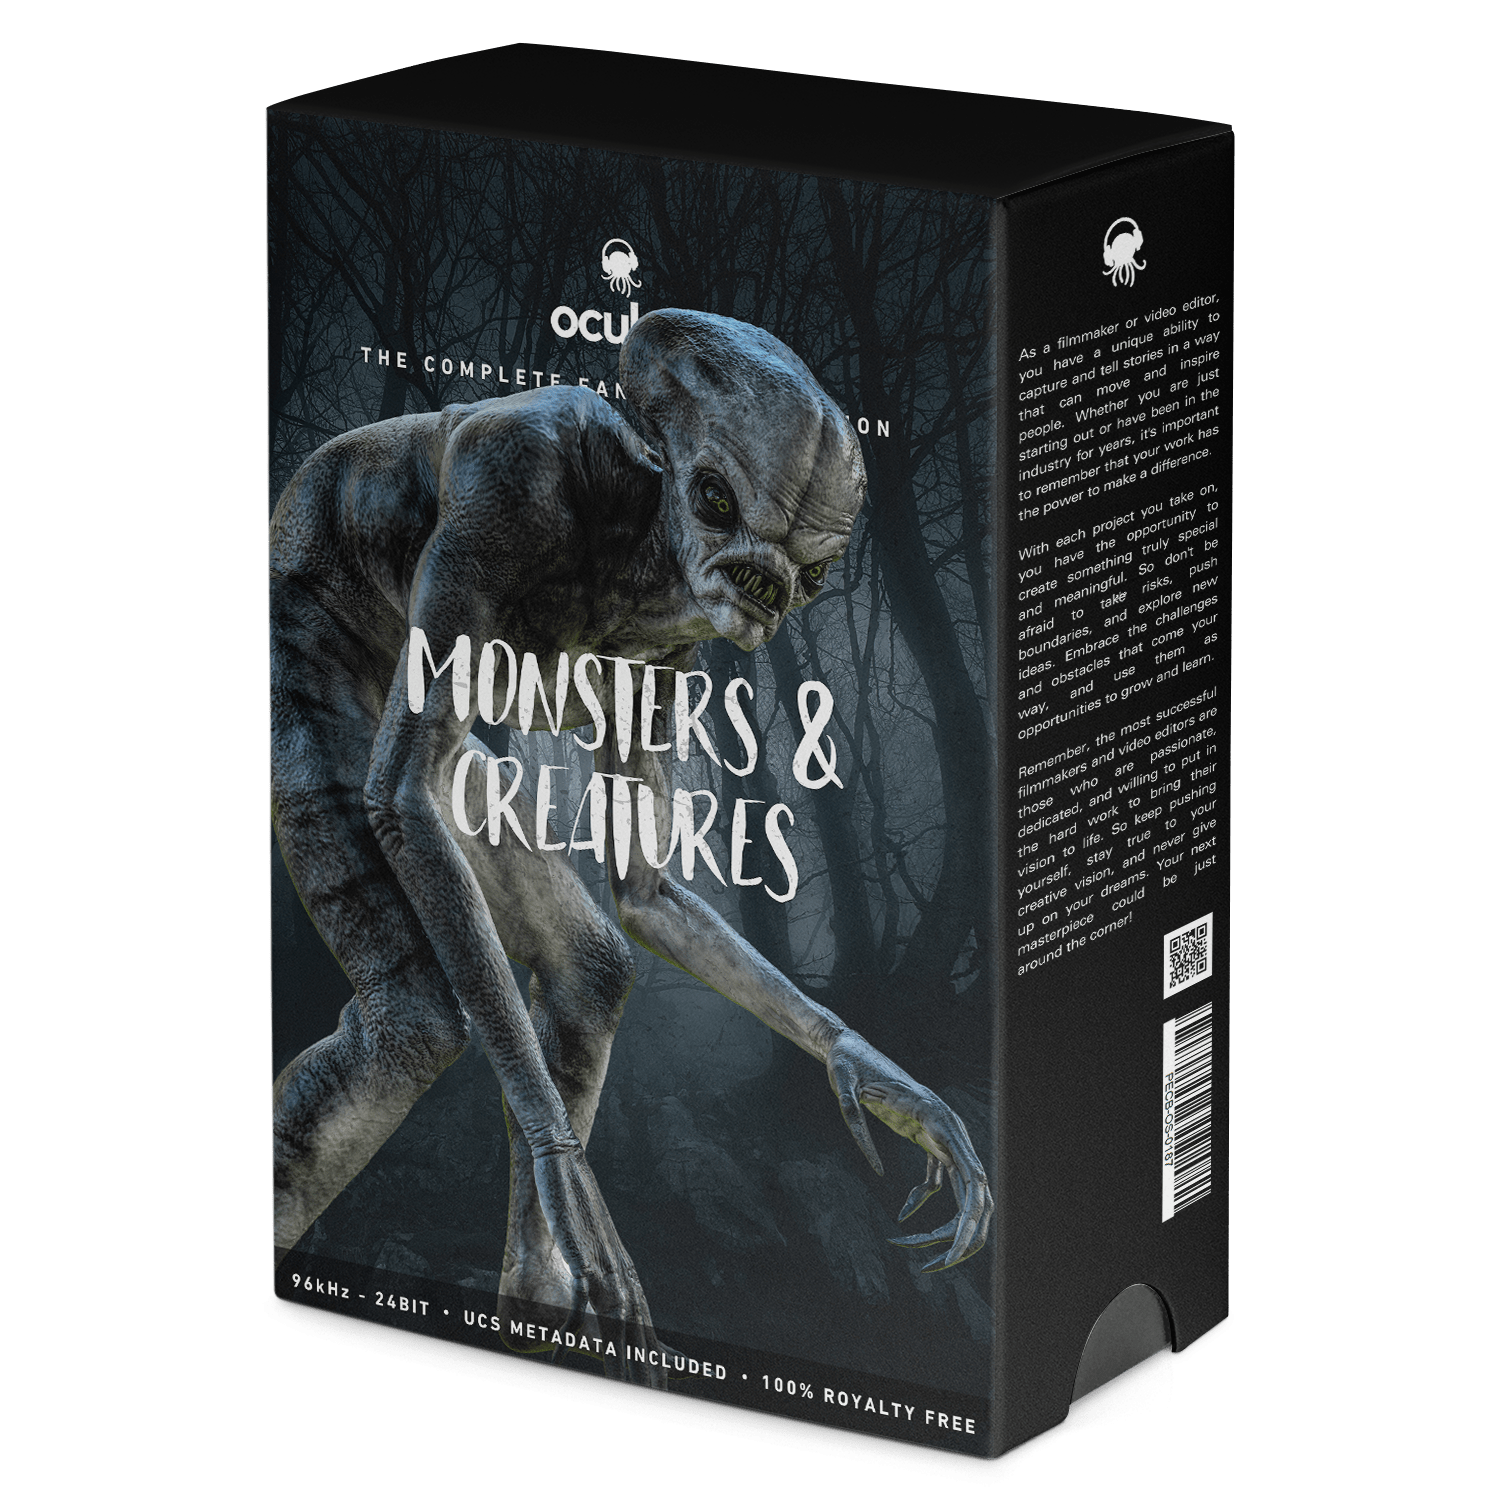 Monsters & Creatures Sound Effects for filmmaking and video editing.